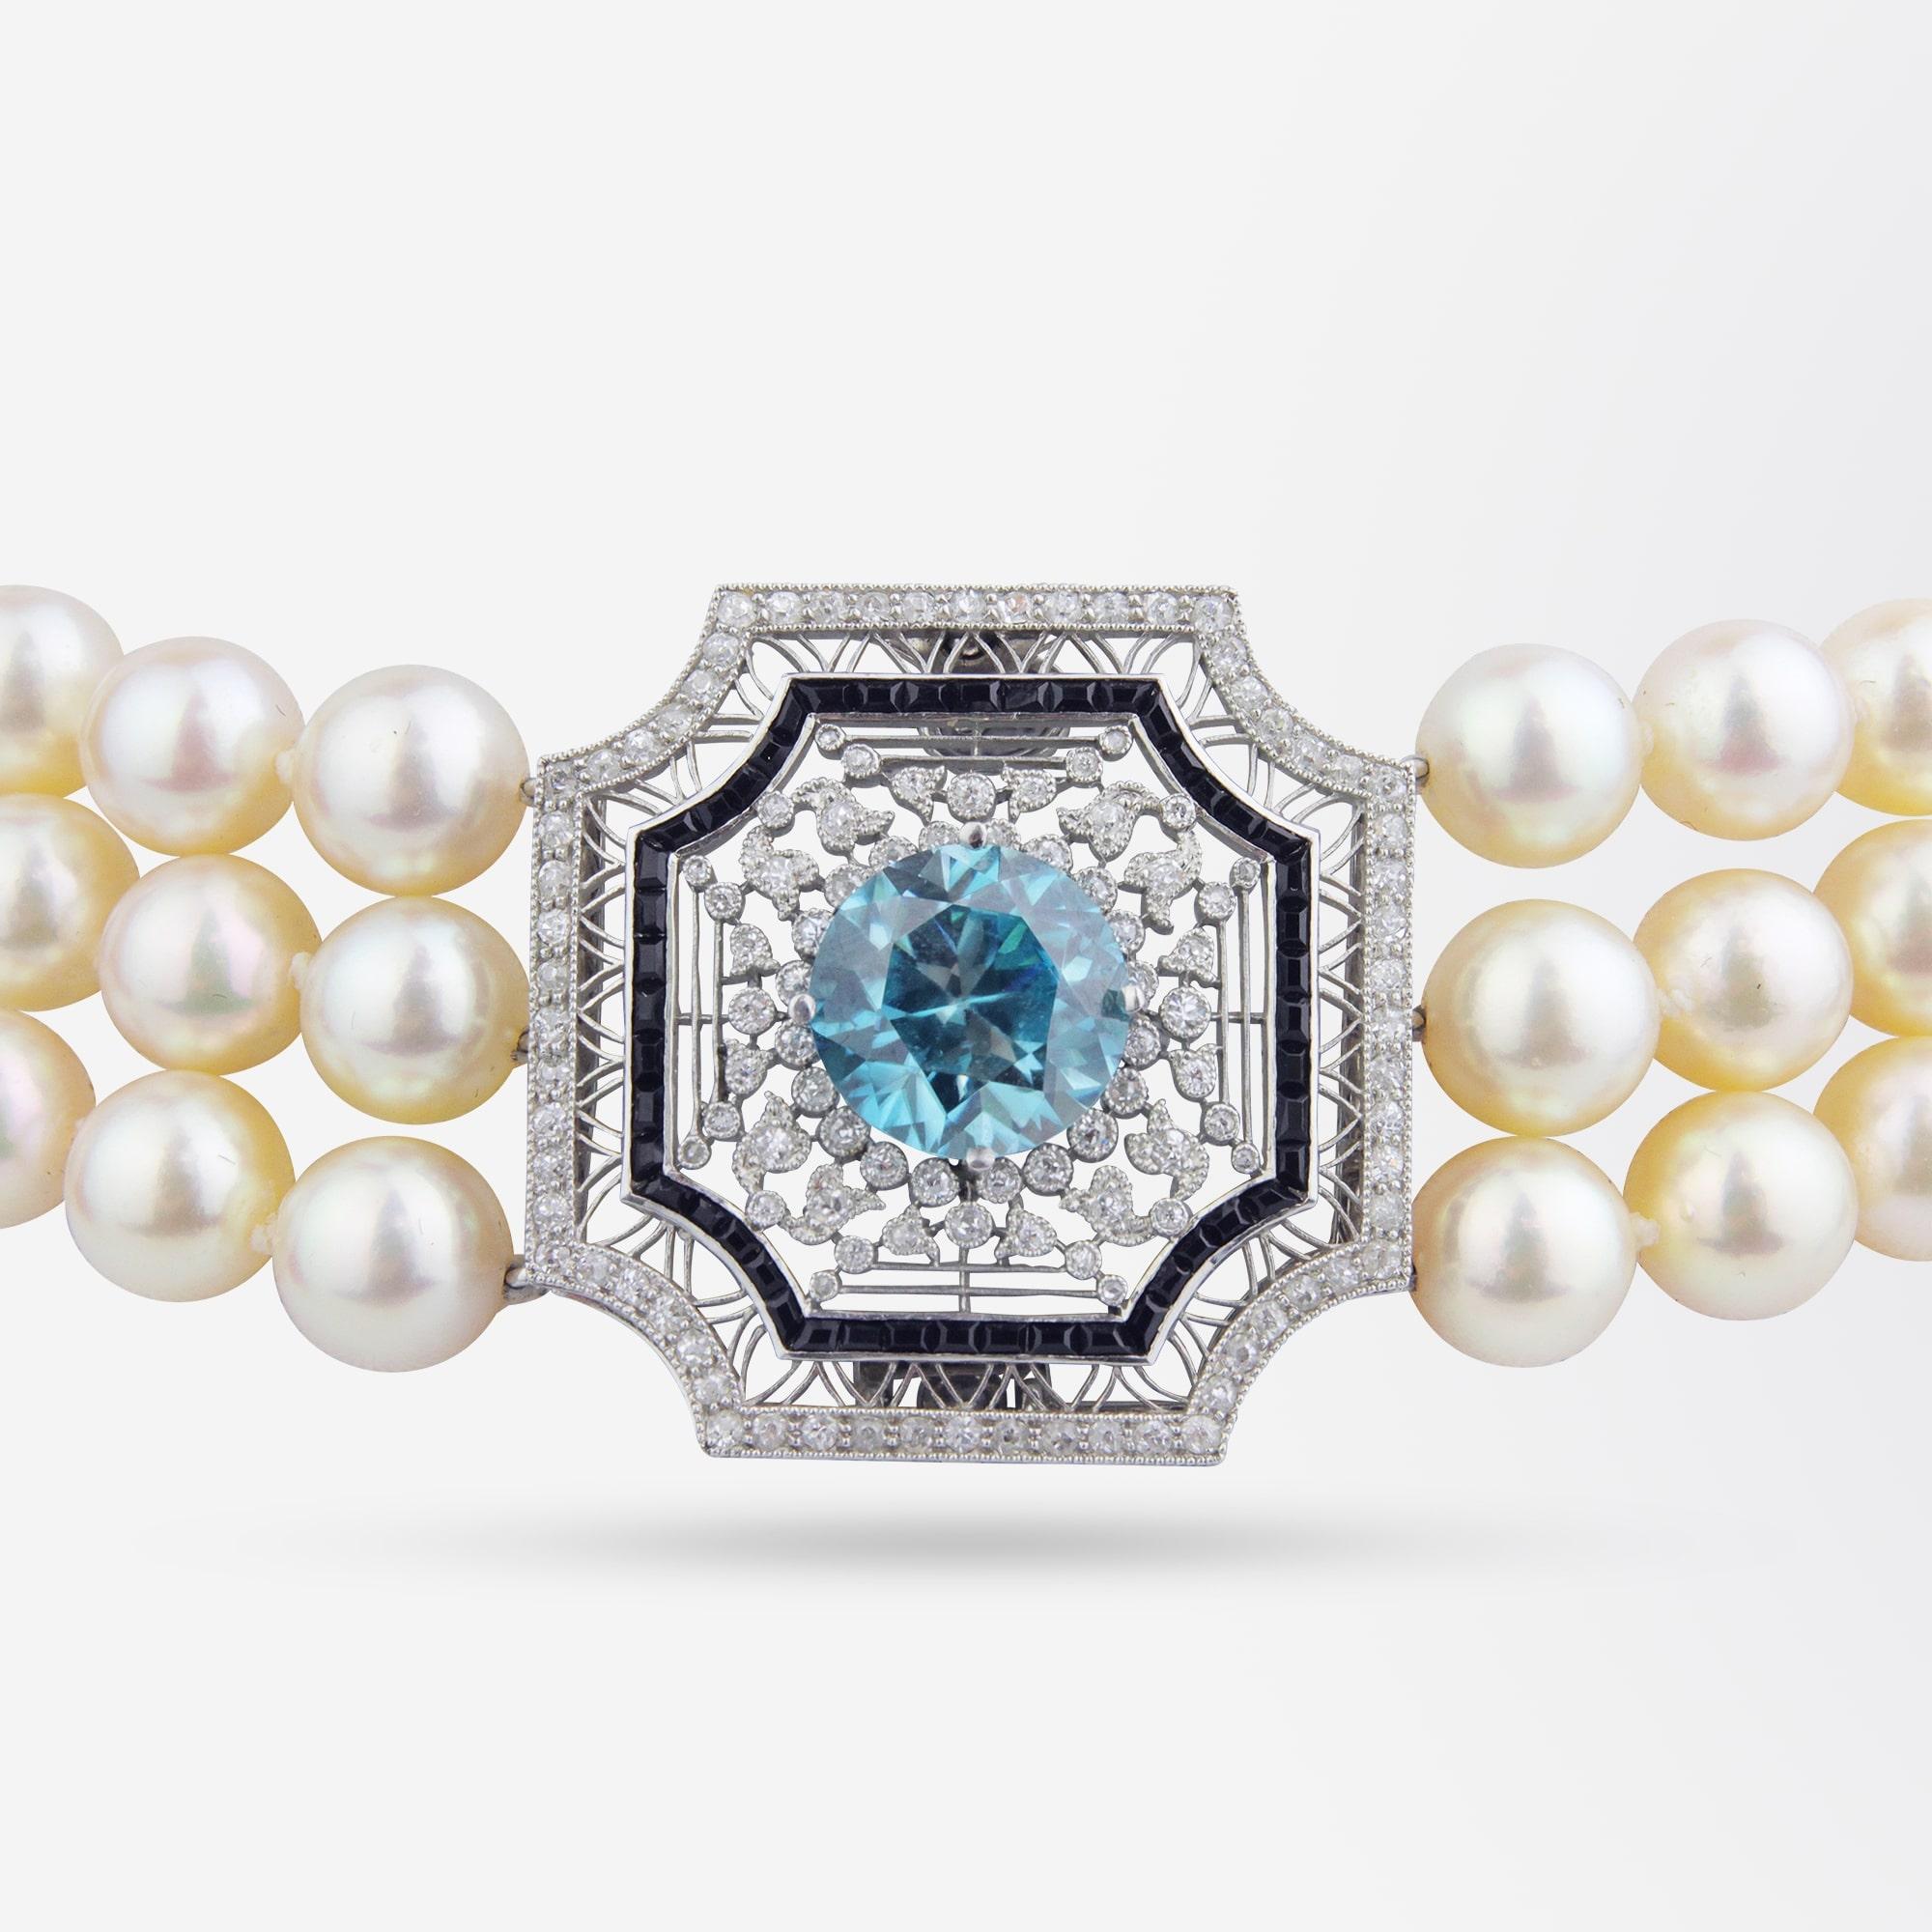 An incredible example of Belle Epoque jewellery in the form of a pearl choker featuring a circa 1915 Platinum, Diamond, Onyx and Blue Zircon detachable panel. Likely to have originally been a brooch pendant, the panel has been incorporated into a